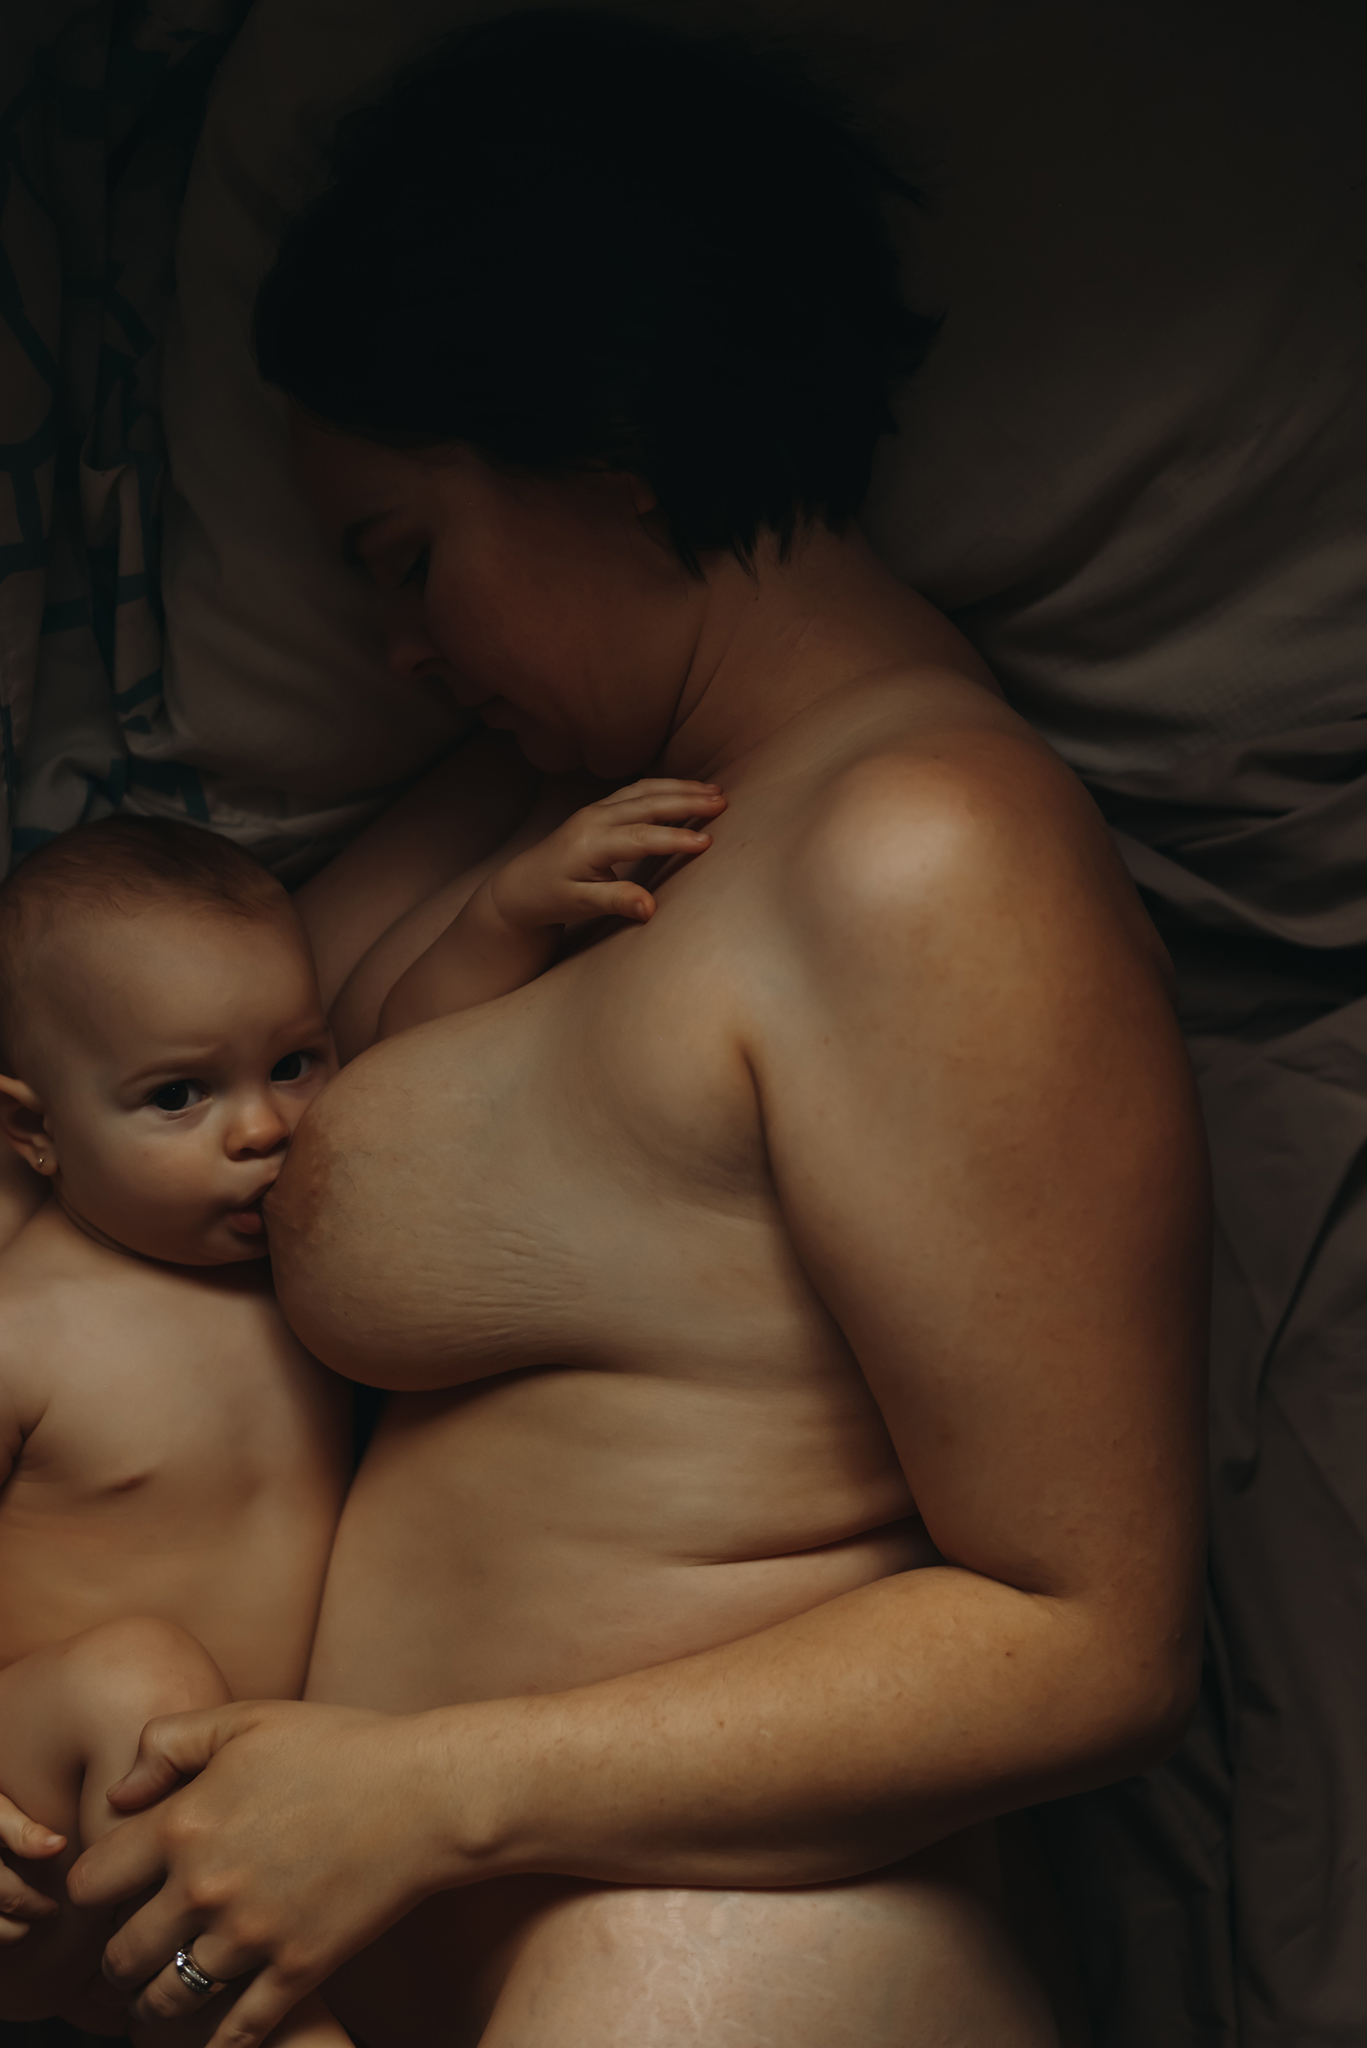 mother and baby breastfeeding in bed